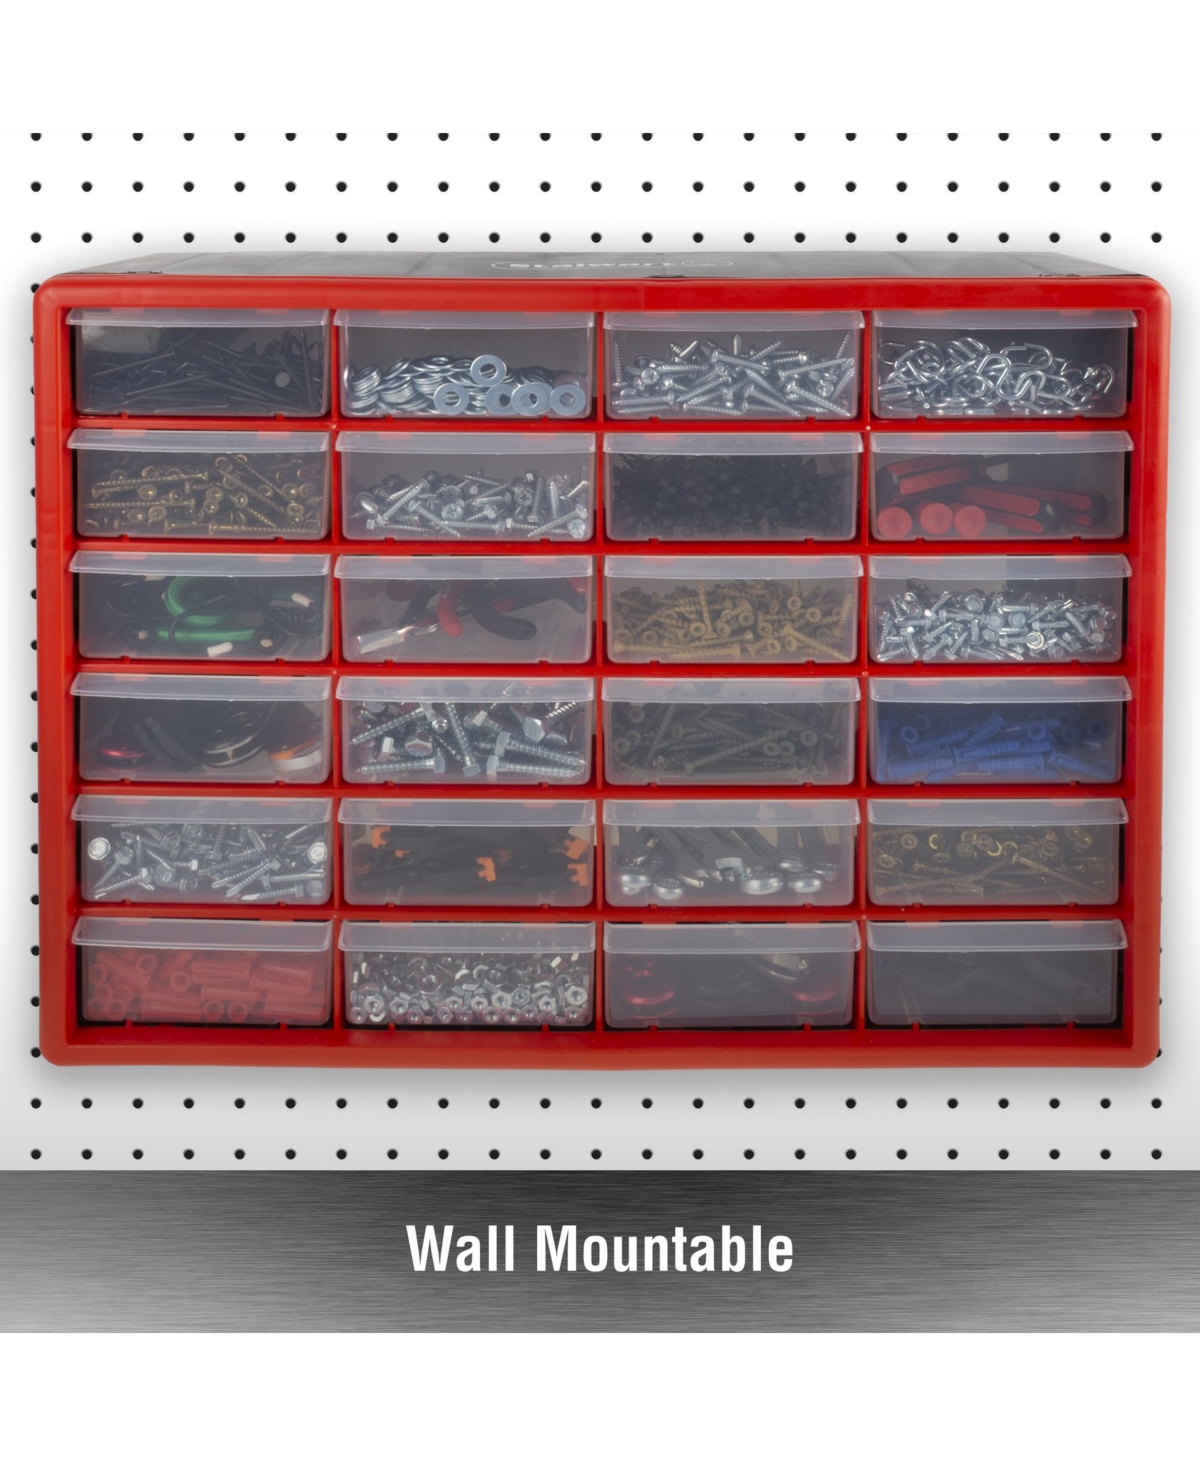 8 Bin Storage Rack Organizer- Wall Mountable Container with